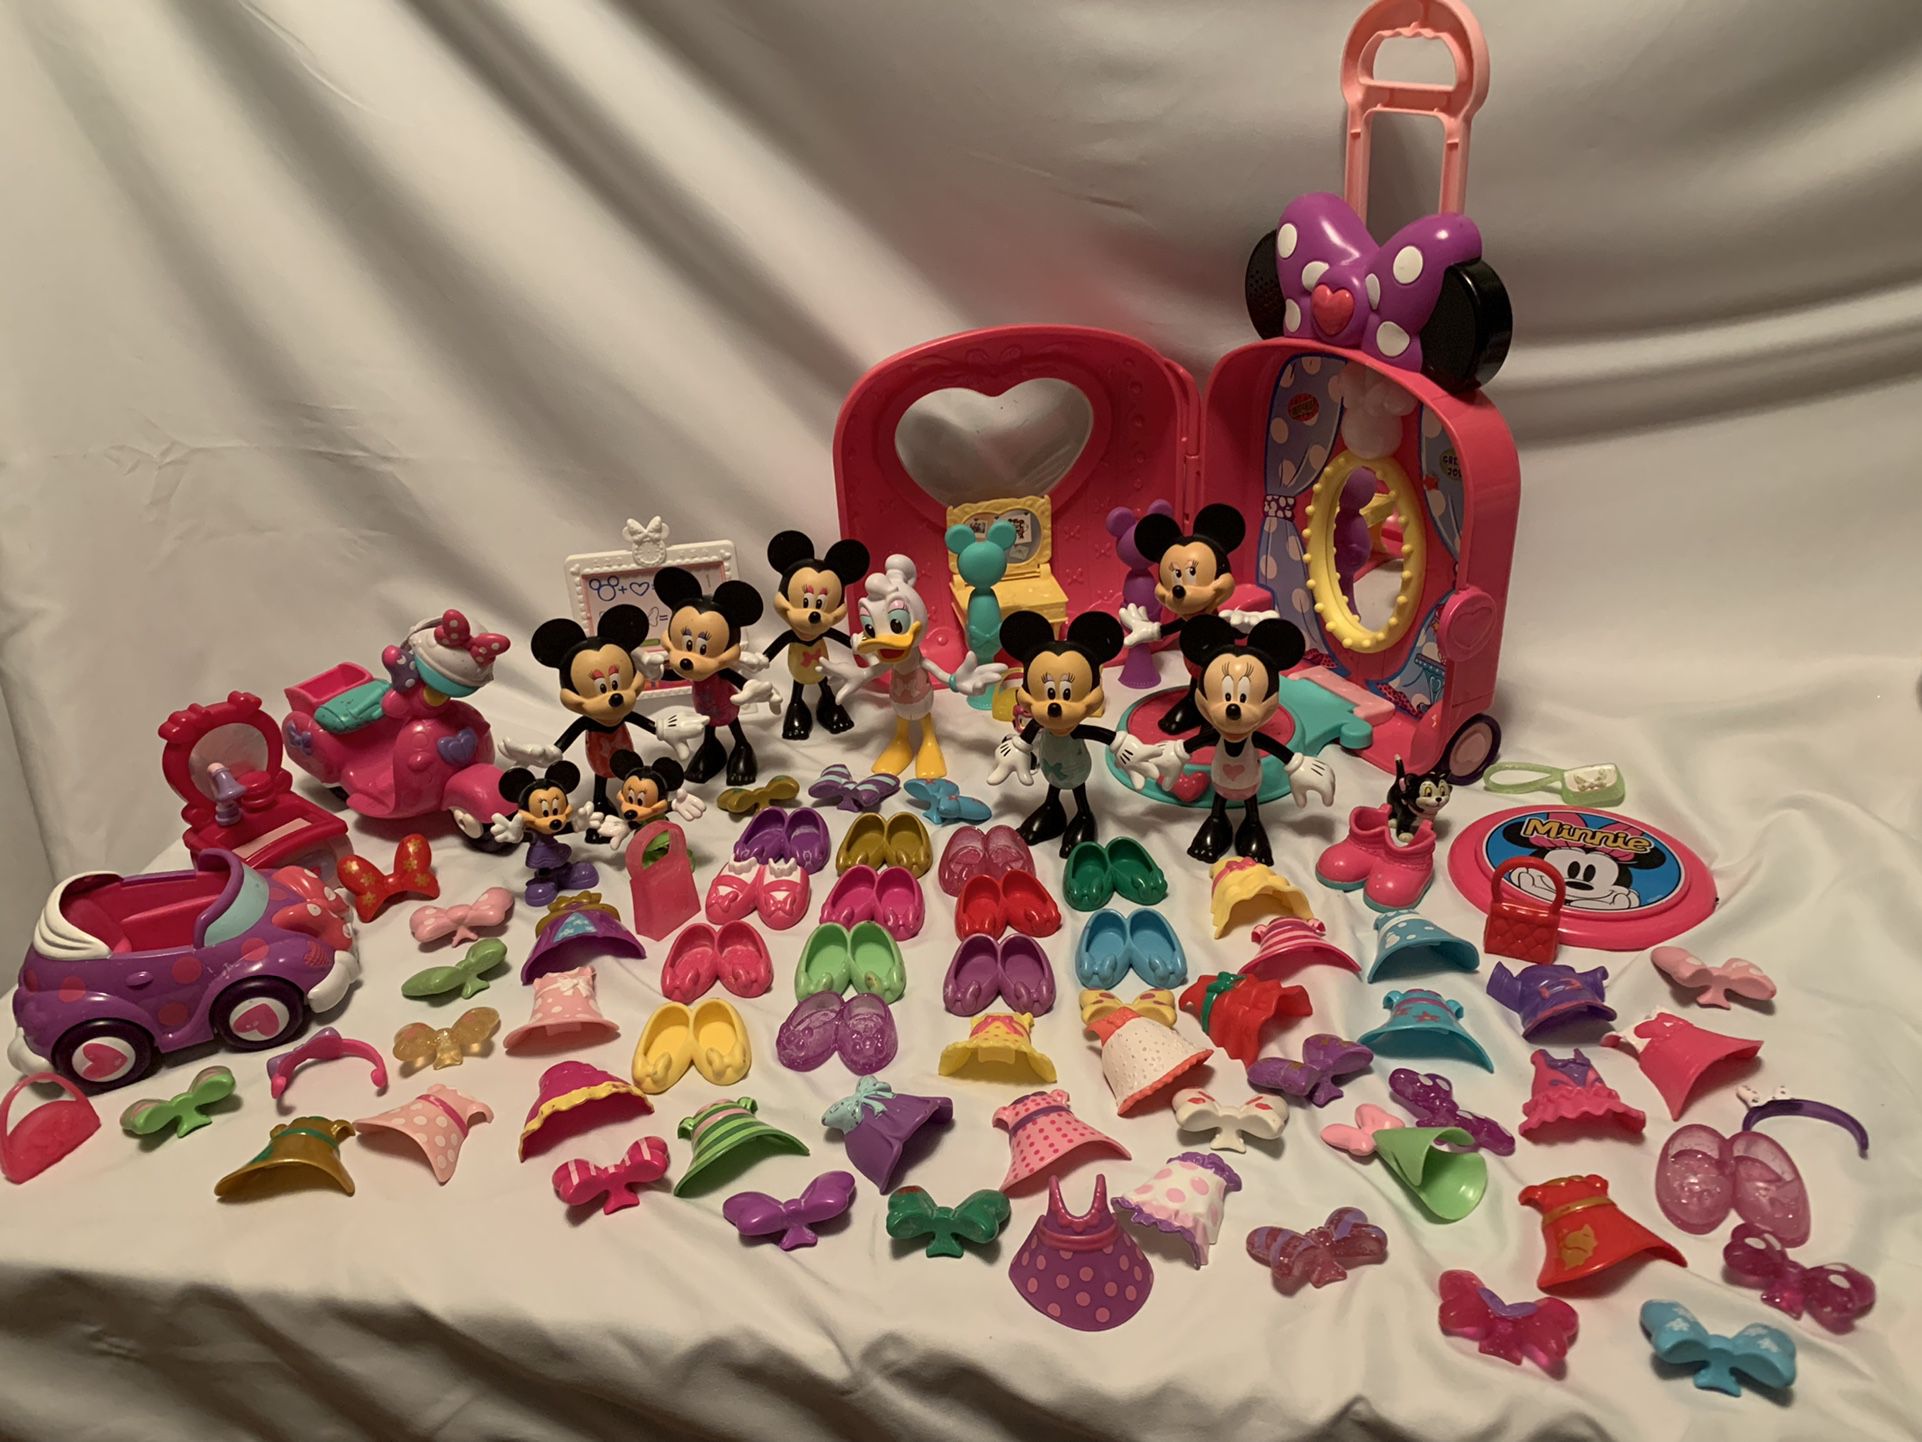 Disney Minnie Mouse And Daisy With Tons Of Accessories And Snap On Outfits